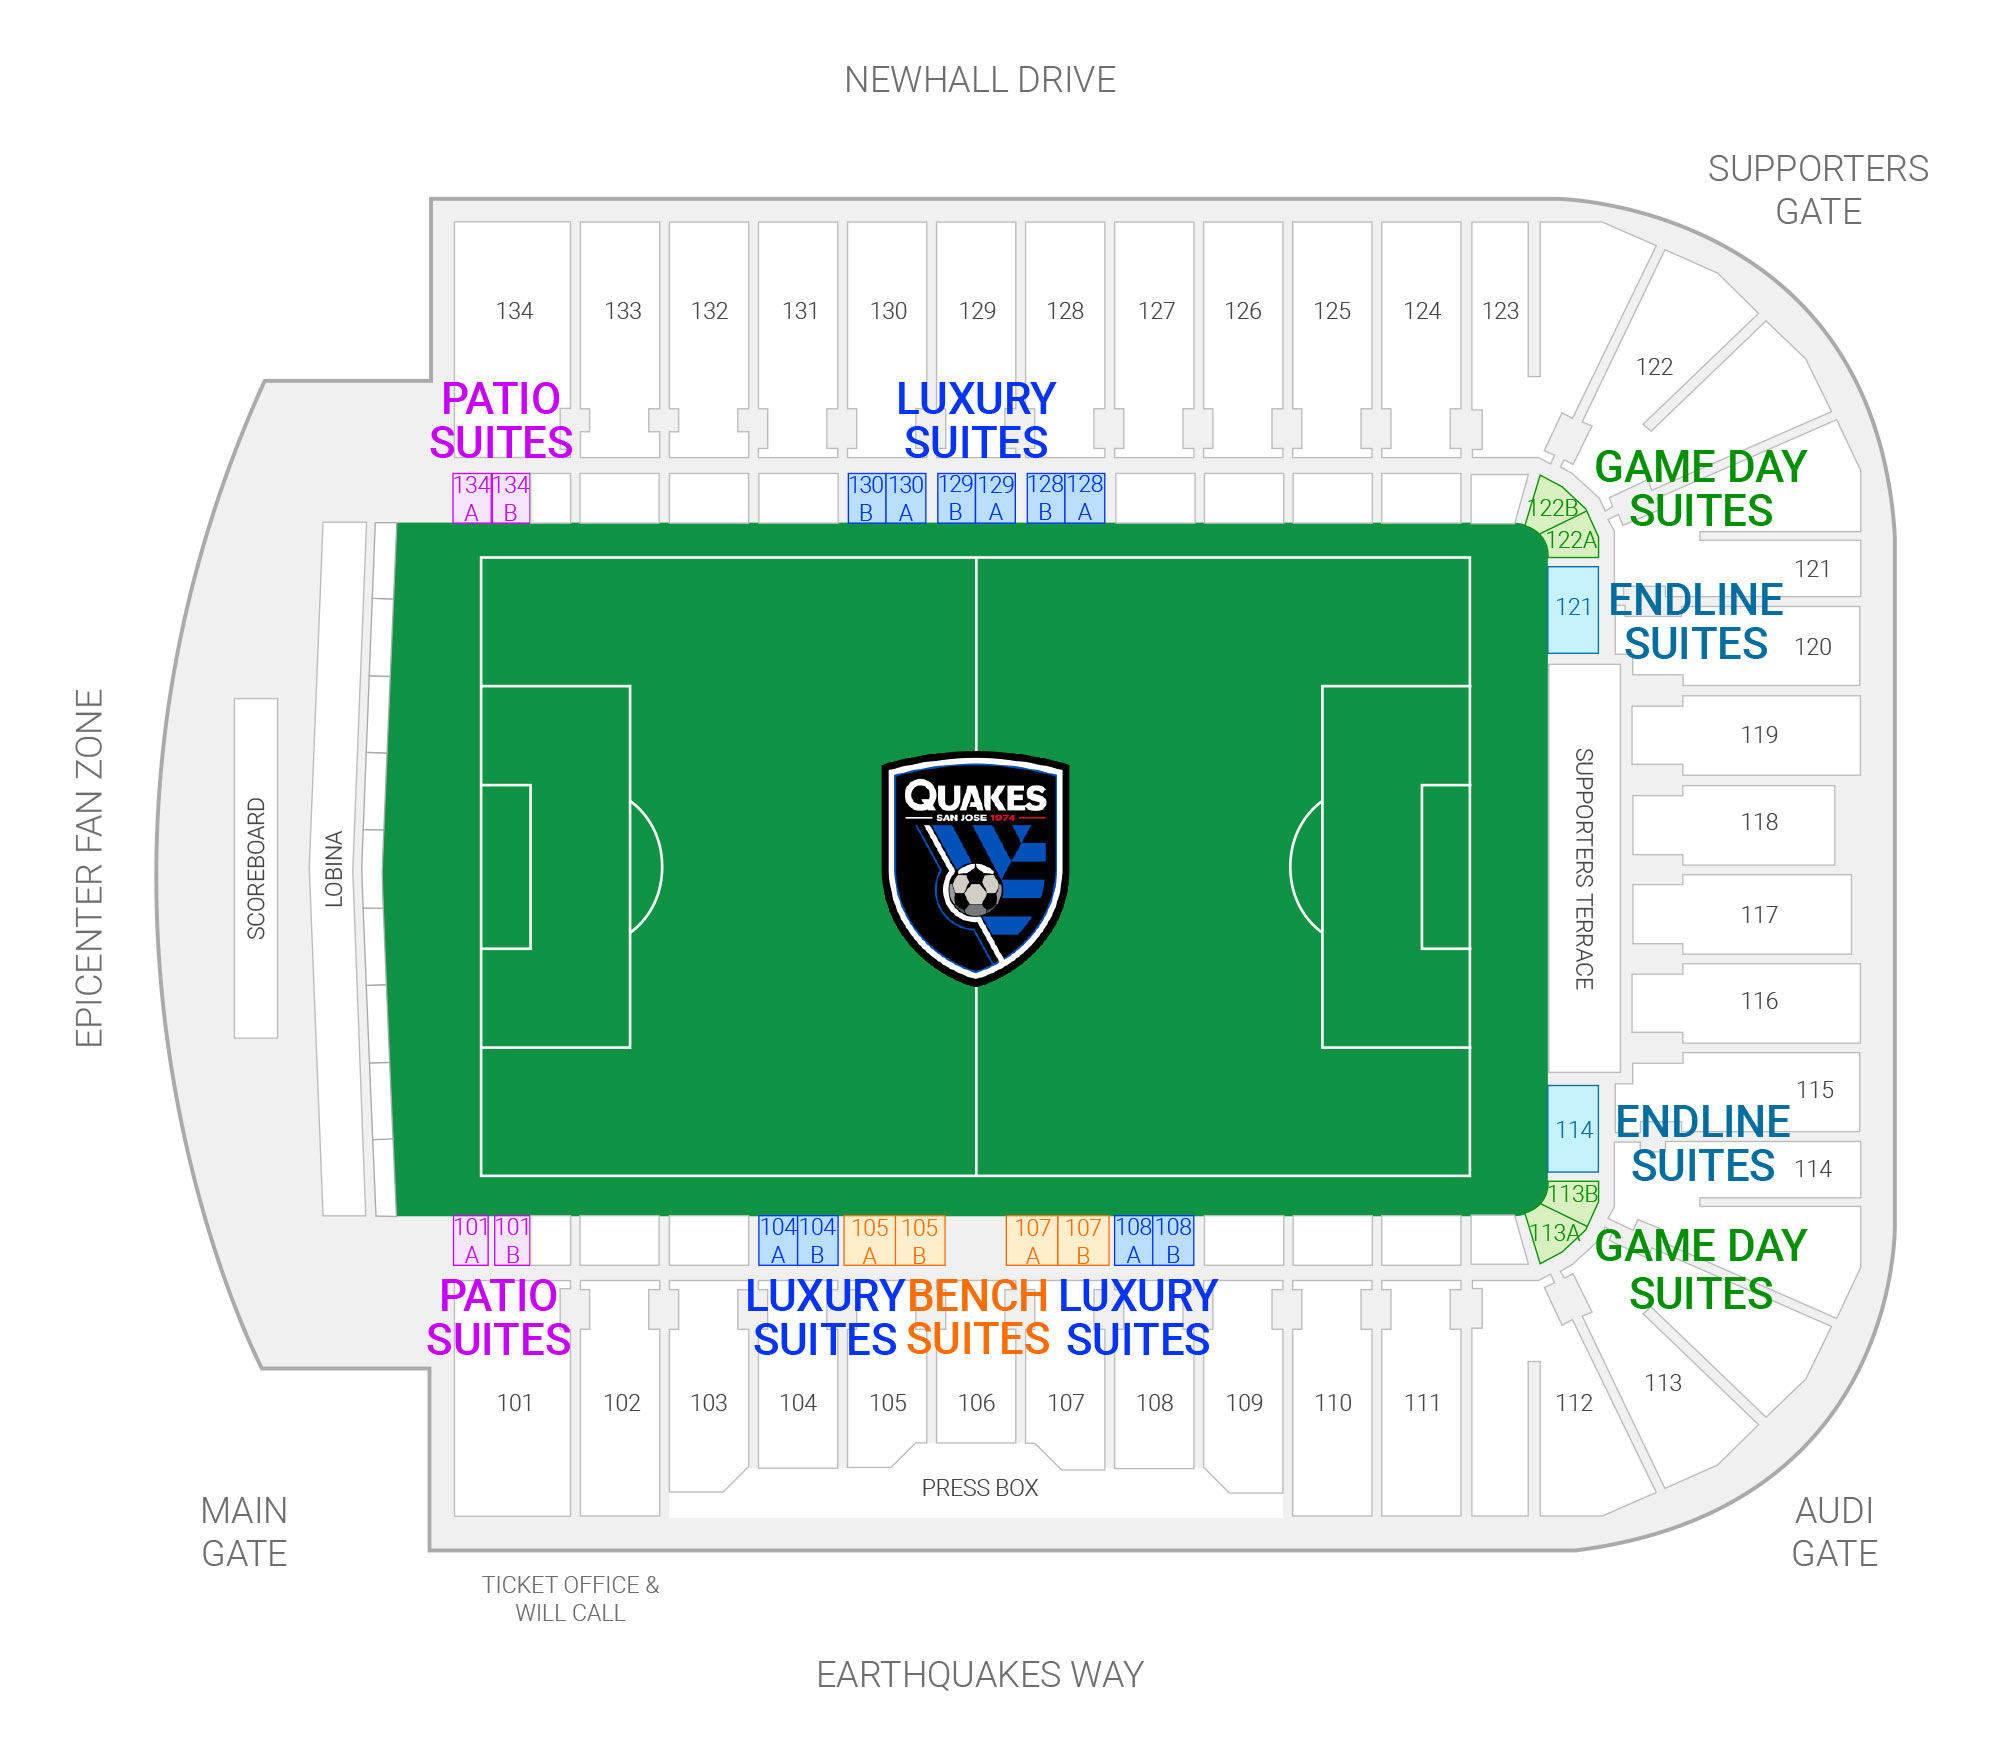 PayPal Park / San Jose Earthquakes Suite Map and Seating Chart